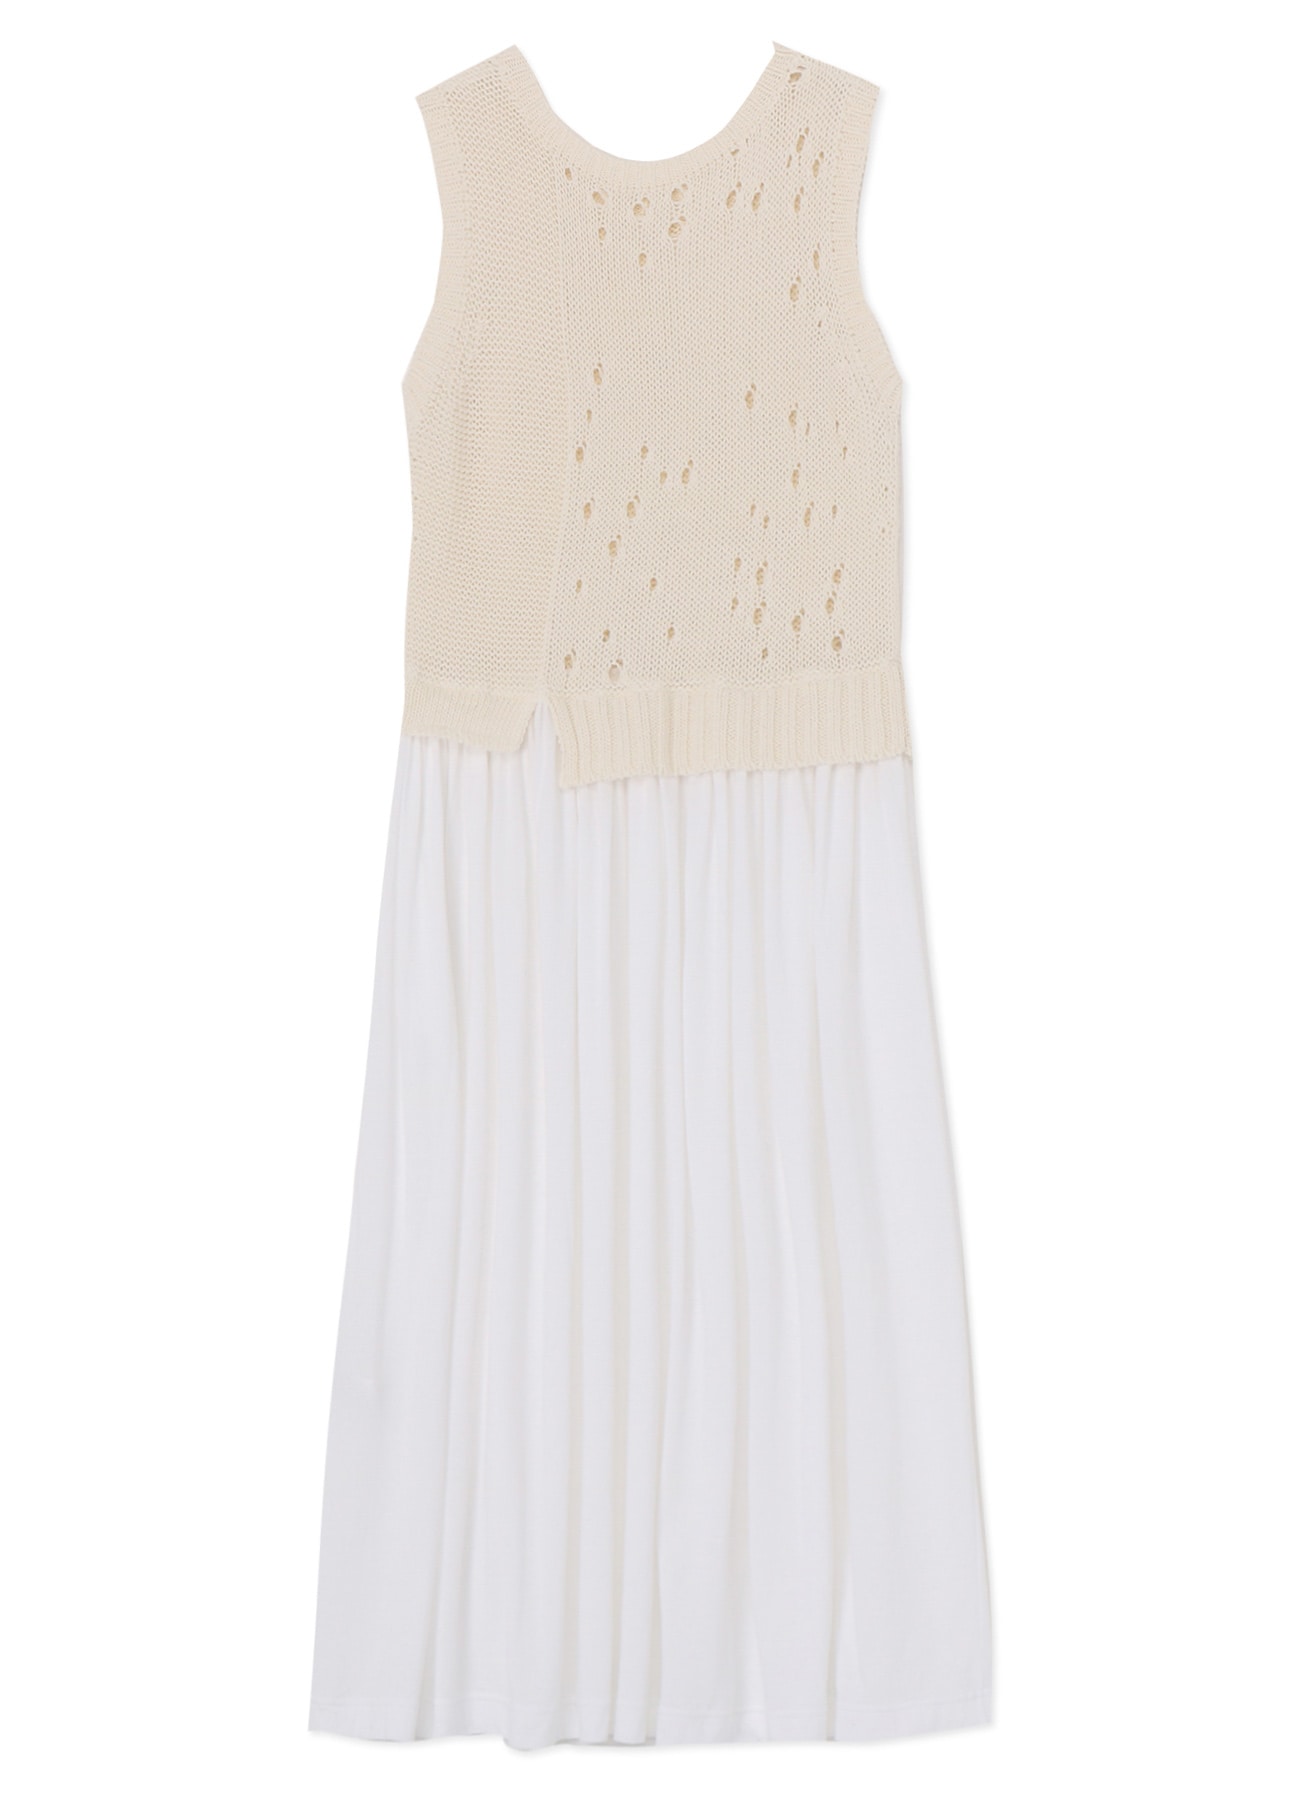 SLEEVELESS DRESS WITH OPENWORKED KNIT